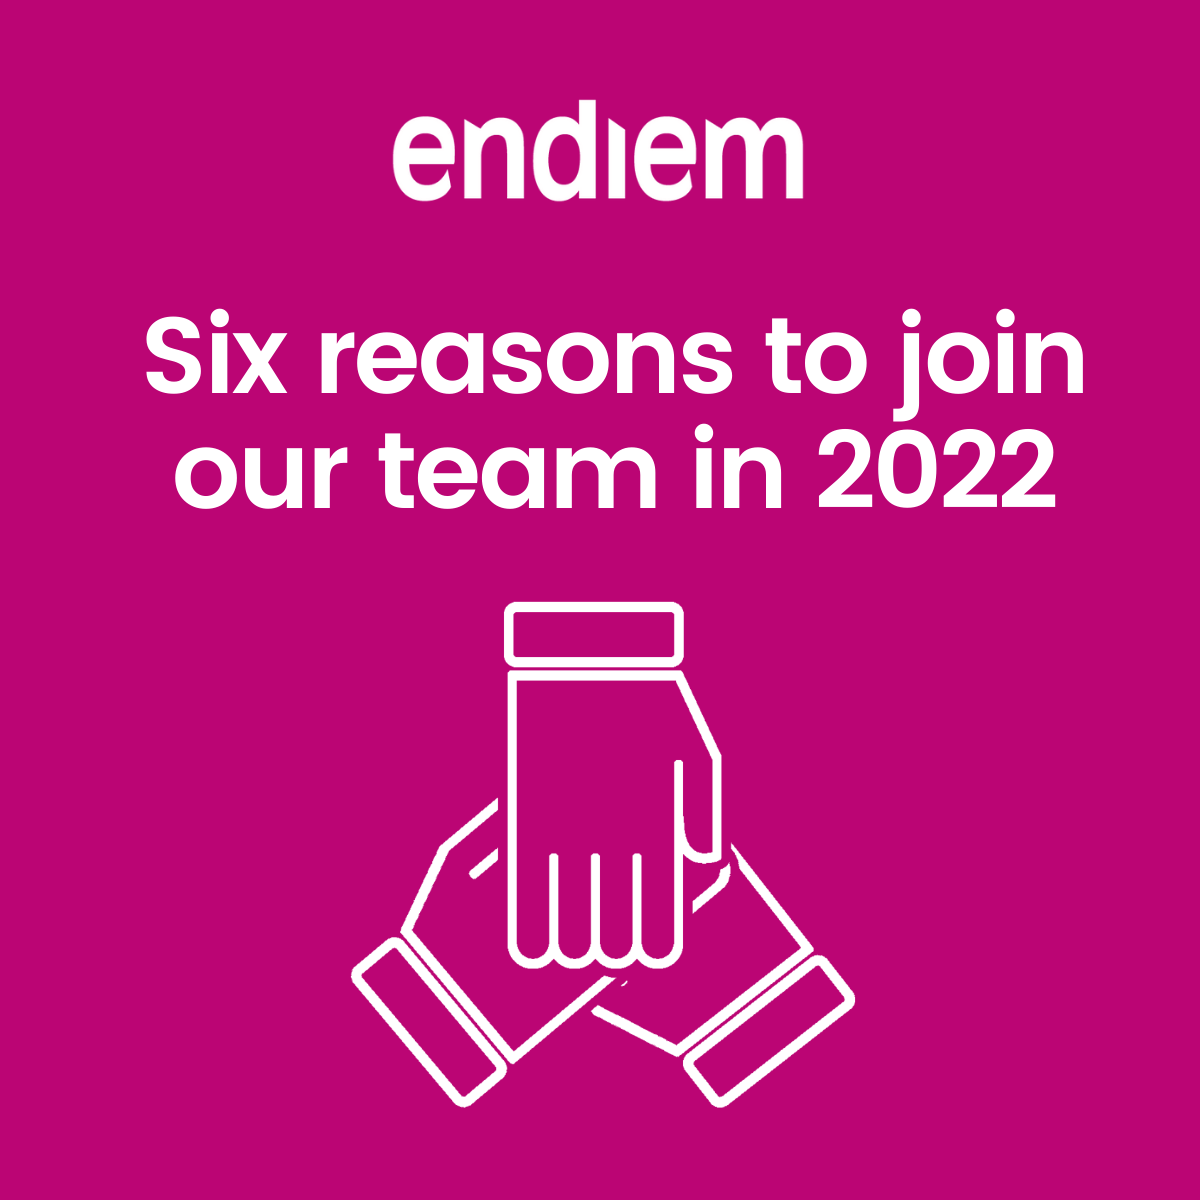 Six reasons you should join Endiem in 2022